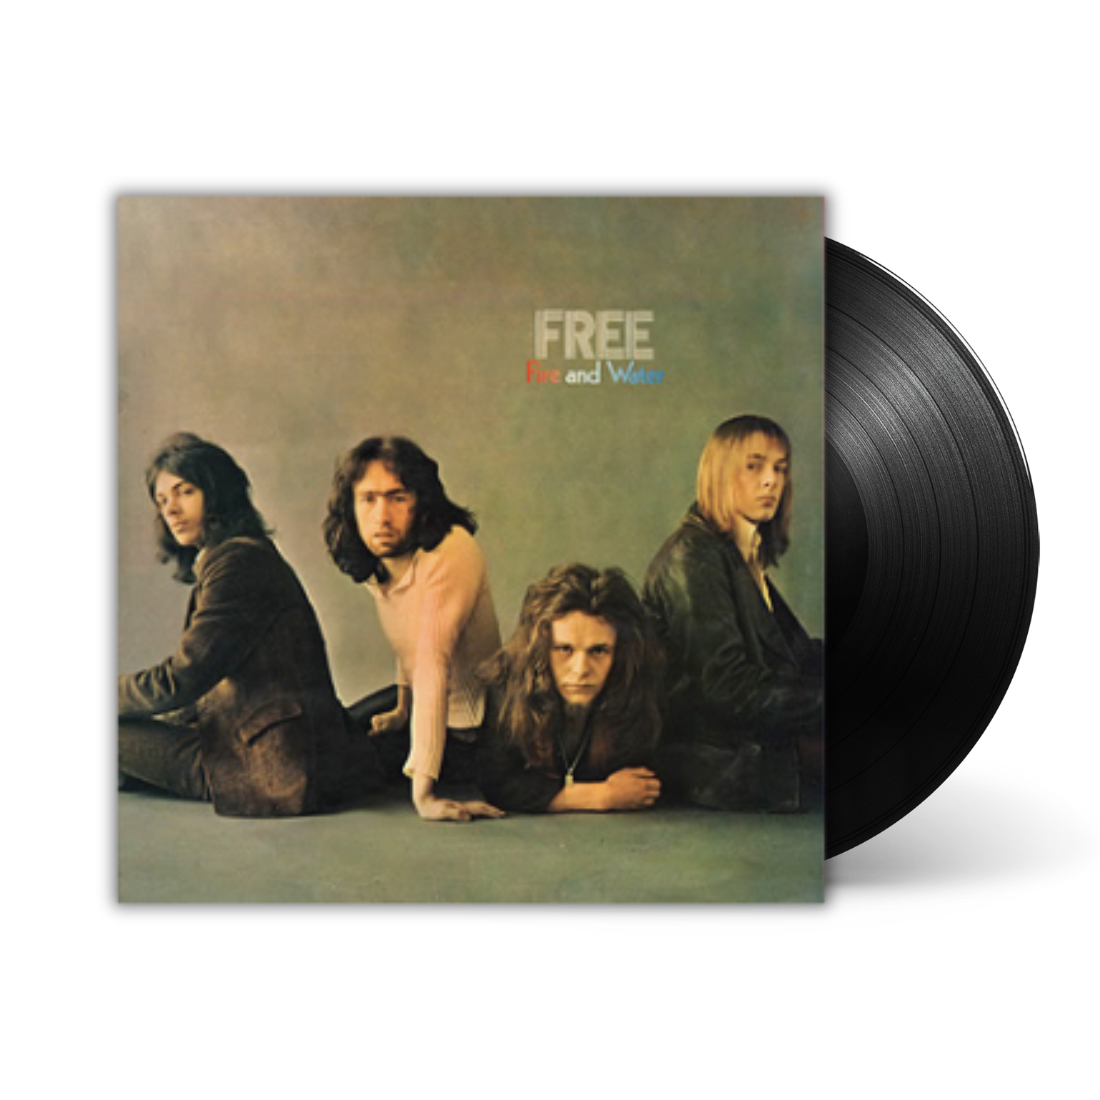 Free - Fire And Water: Vinyl LP